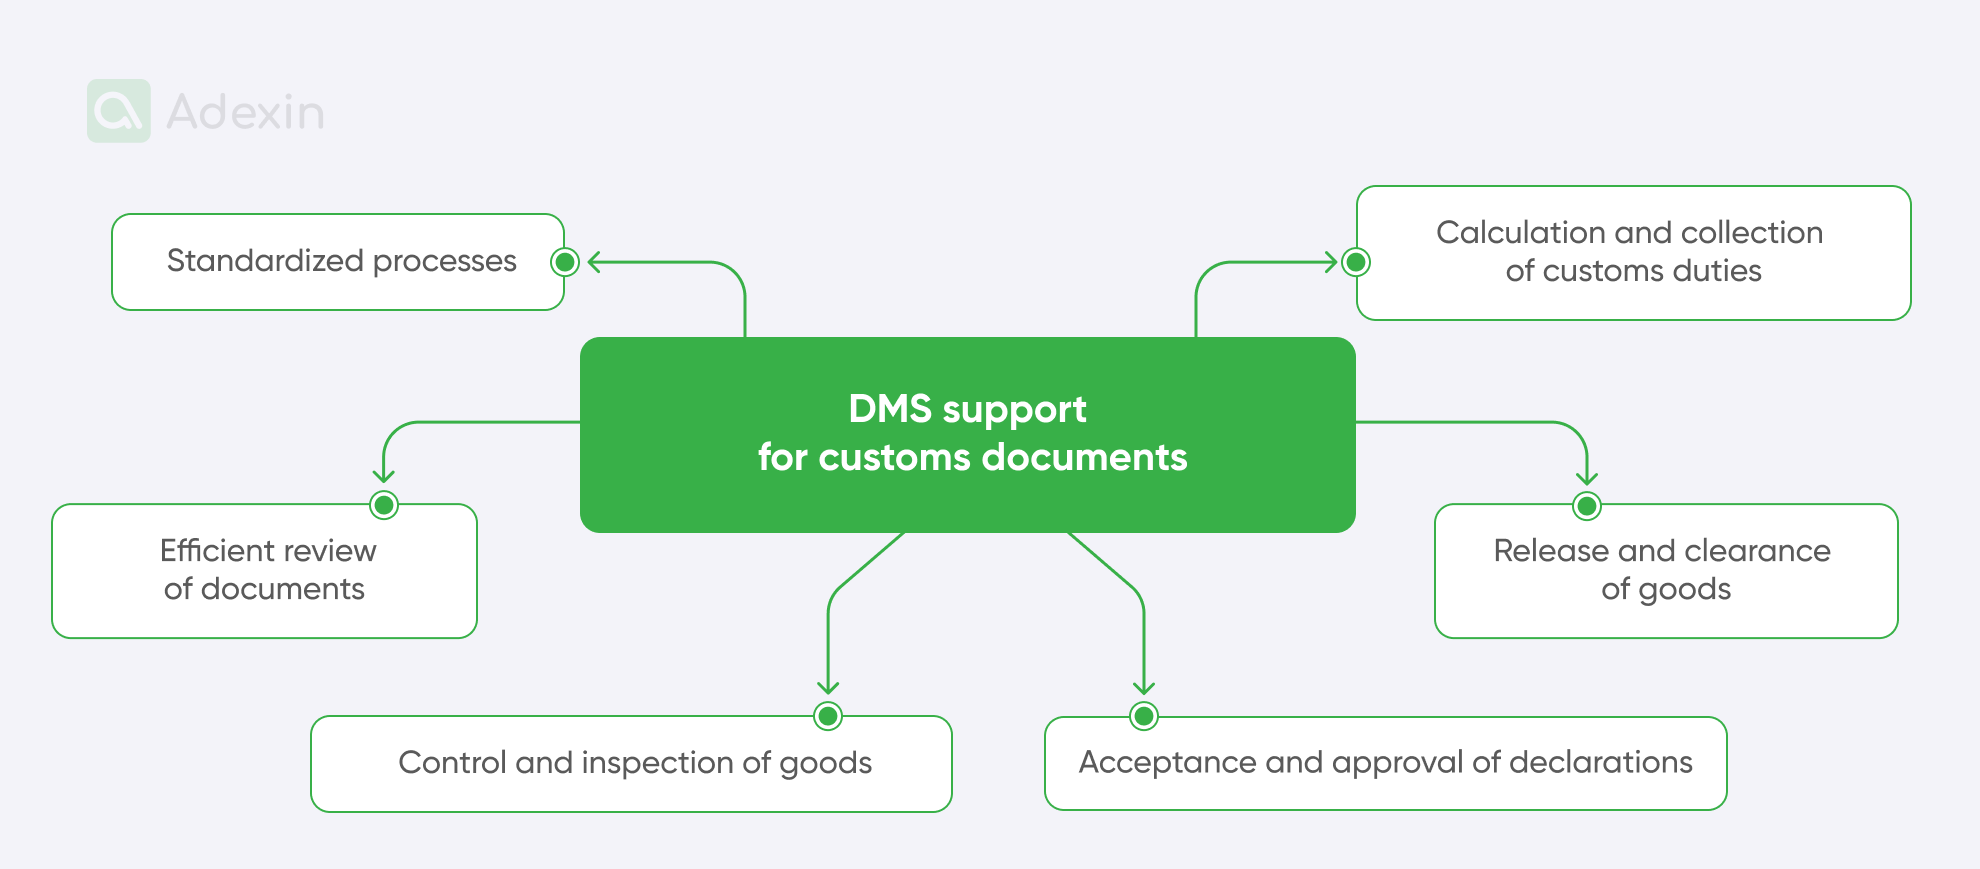 Benefits of DMS support for custom documents